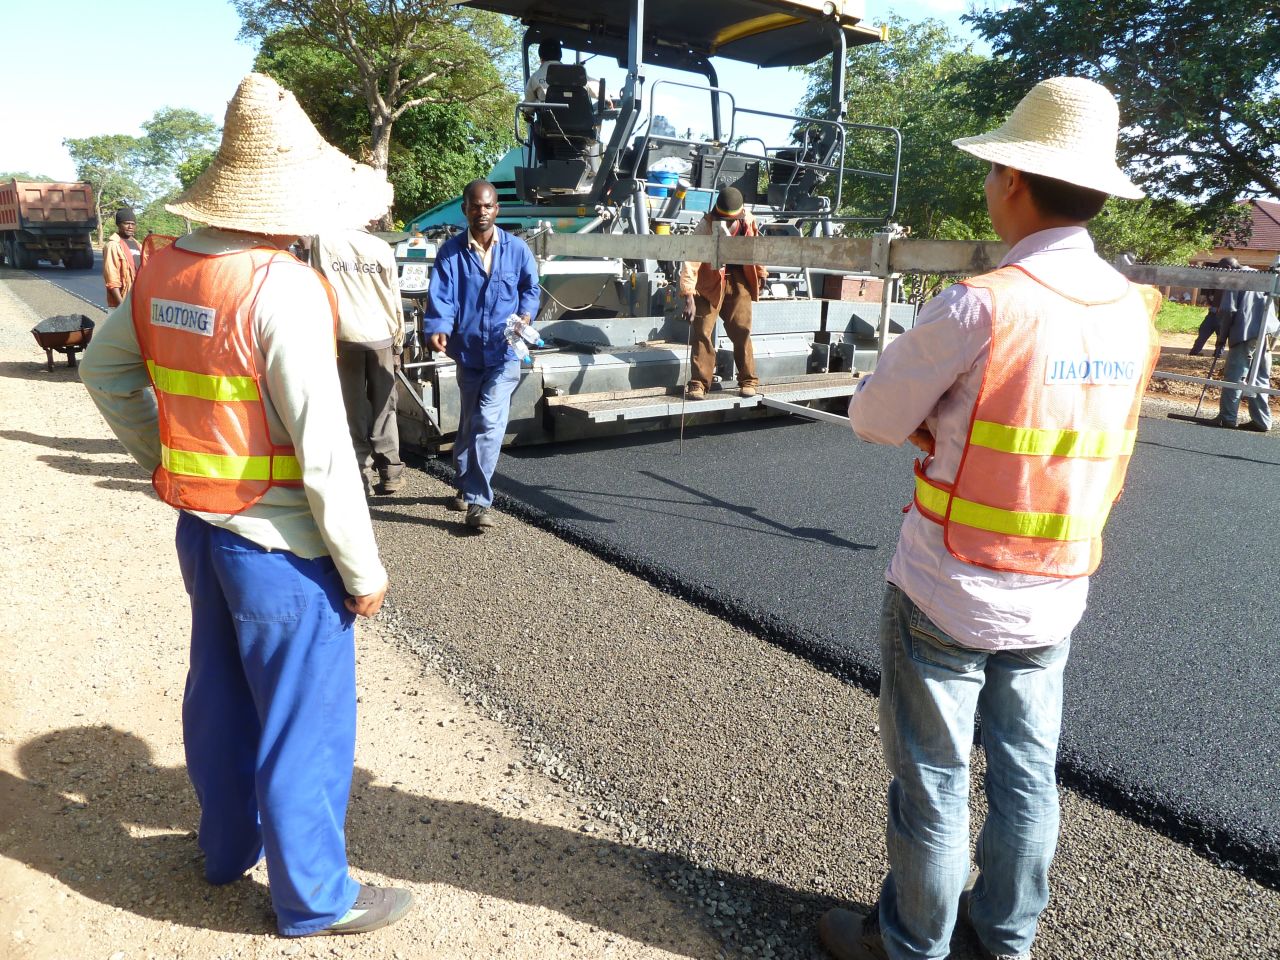 Chinese and Zambian workers building a new road in Zambia.